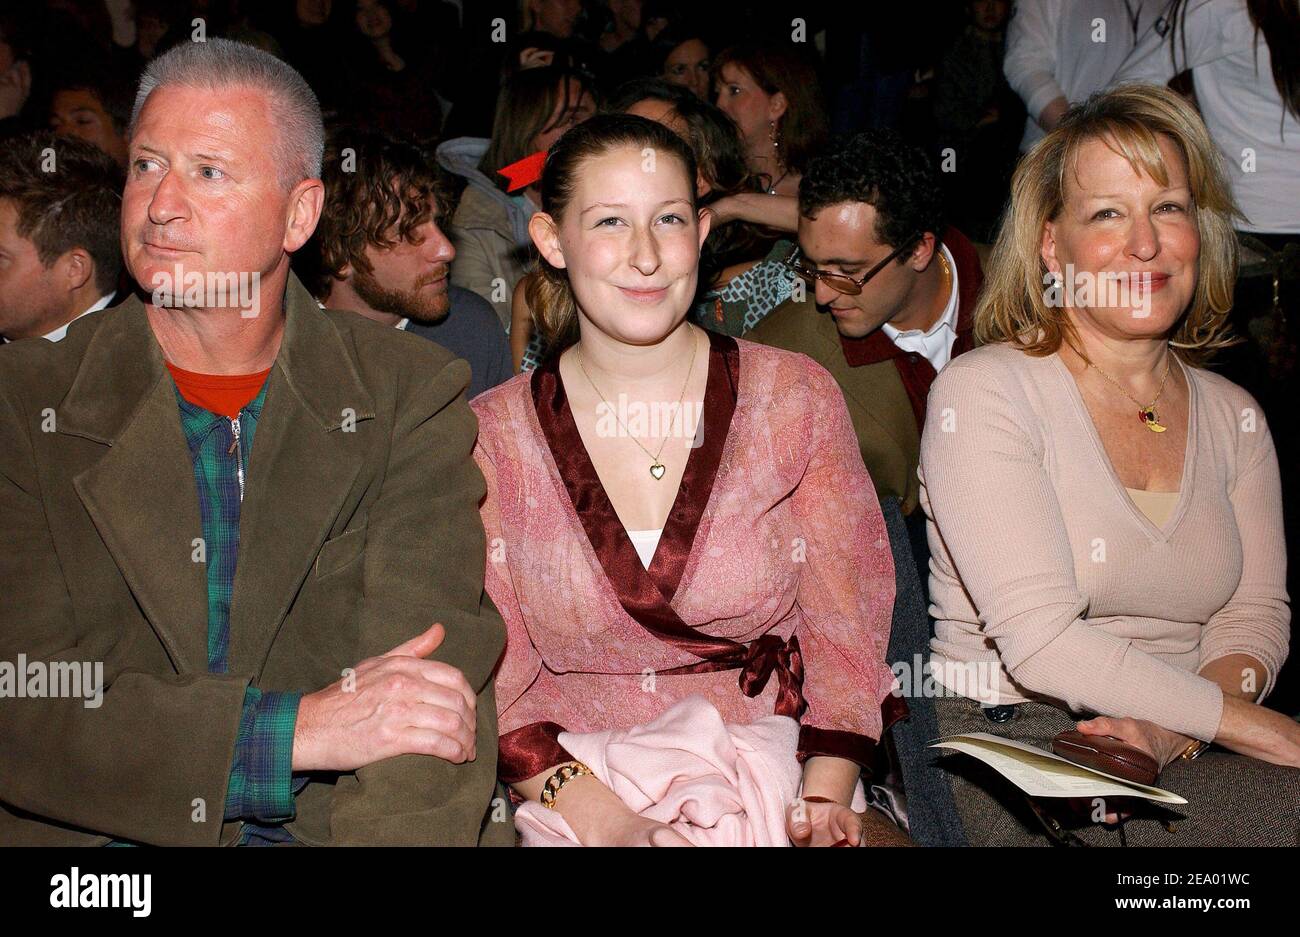 Bette Midler, her daughter Sophie and her husband Martin von Haselberg  attend the Zac Posen runway presentation, part of the Fall-Winter 2005  Fashion Week, held at the Tents at Bryant Park, New